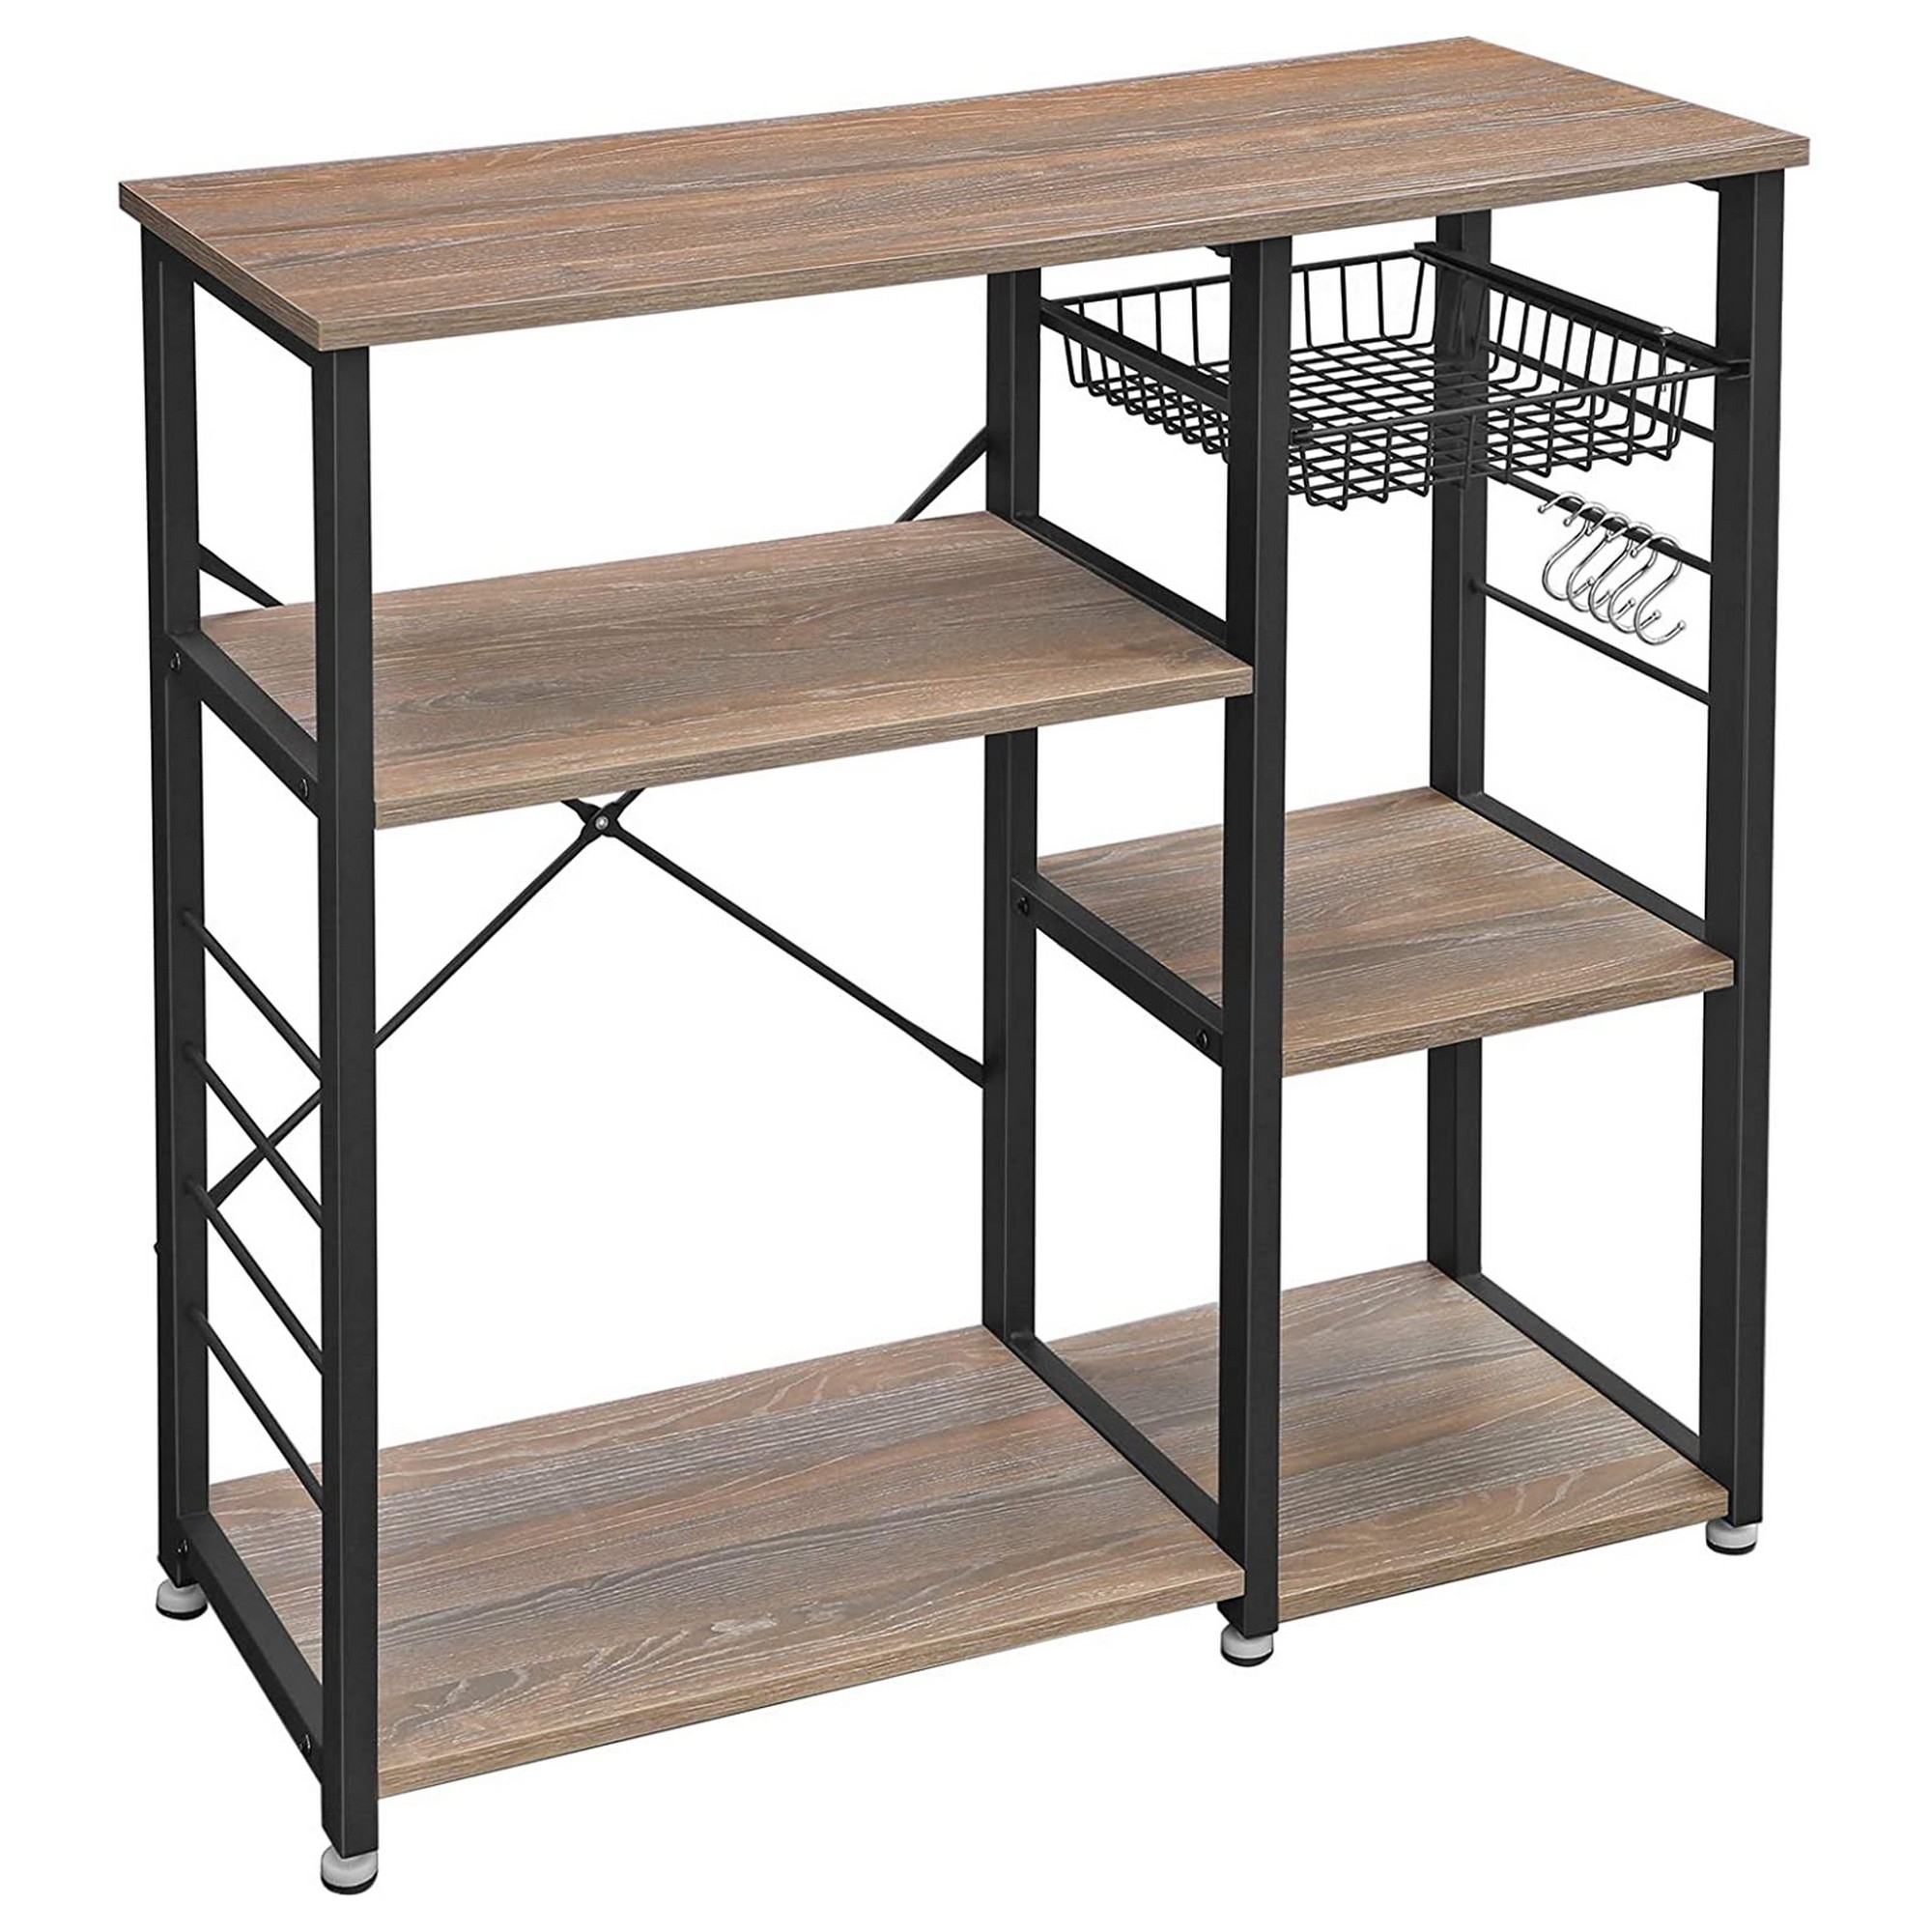 Saltoro Sherpi Wooden Bakers Rack with 4 Shelves and Wire Basket, Brown and Black